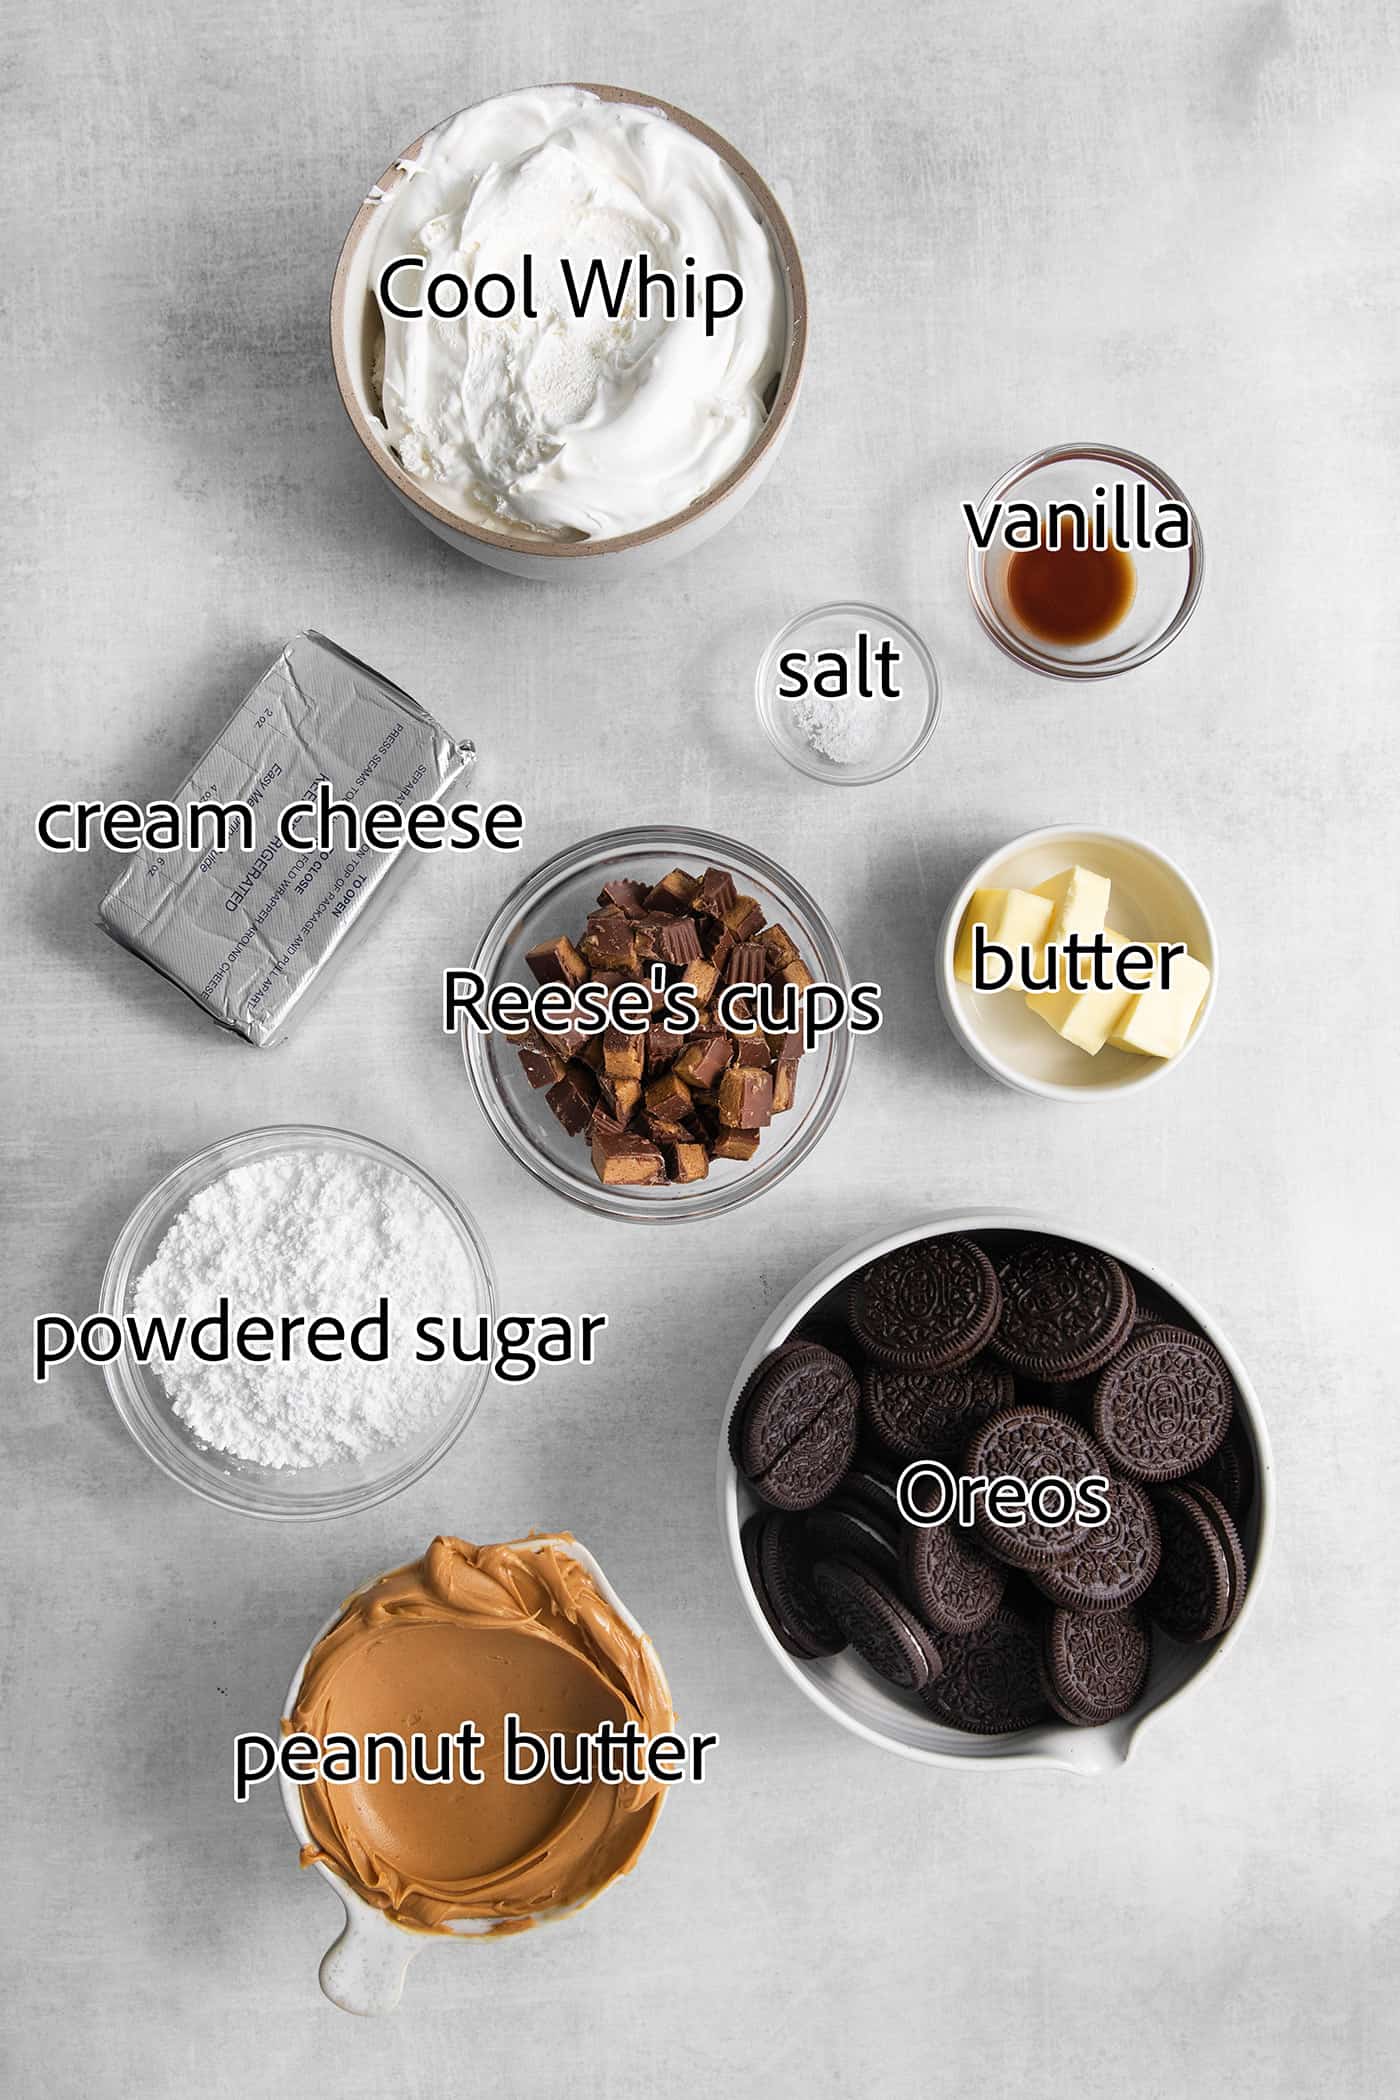 The ingredients for Reeses pie are shown: peanut butter, cream cheese, peanut butter cups, whipped topping, butter, Oreos, salt, vanilla, powdered sugar.